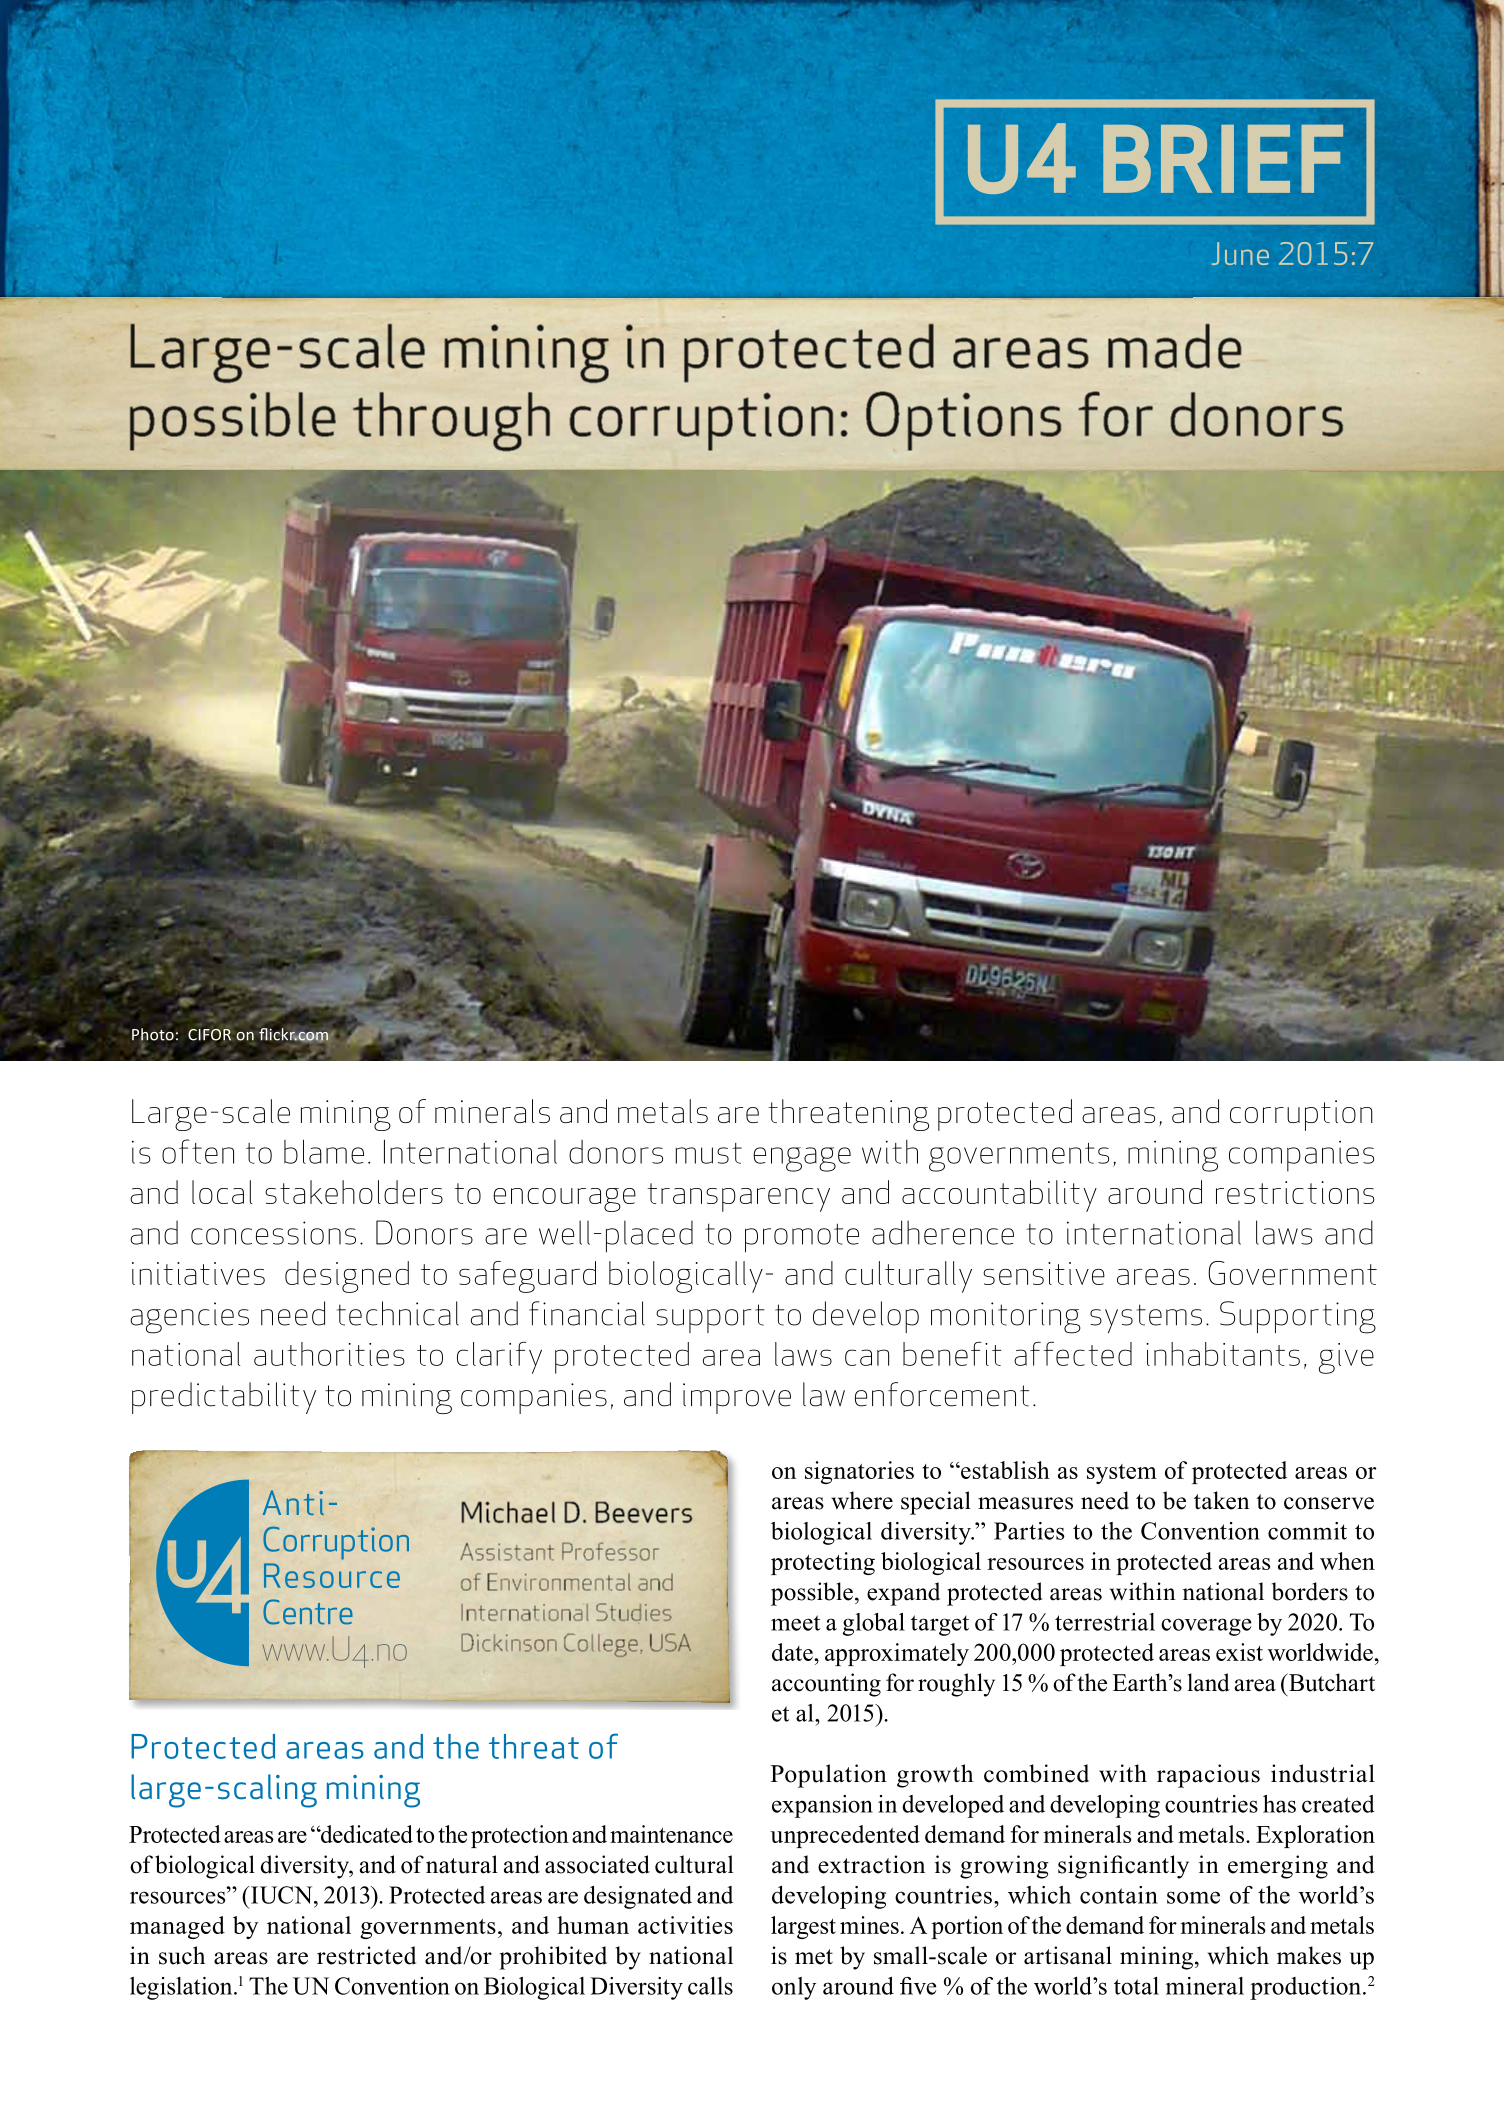 Large-scale mining in protected areas made possible through corruption: Options for donors